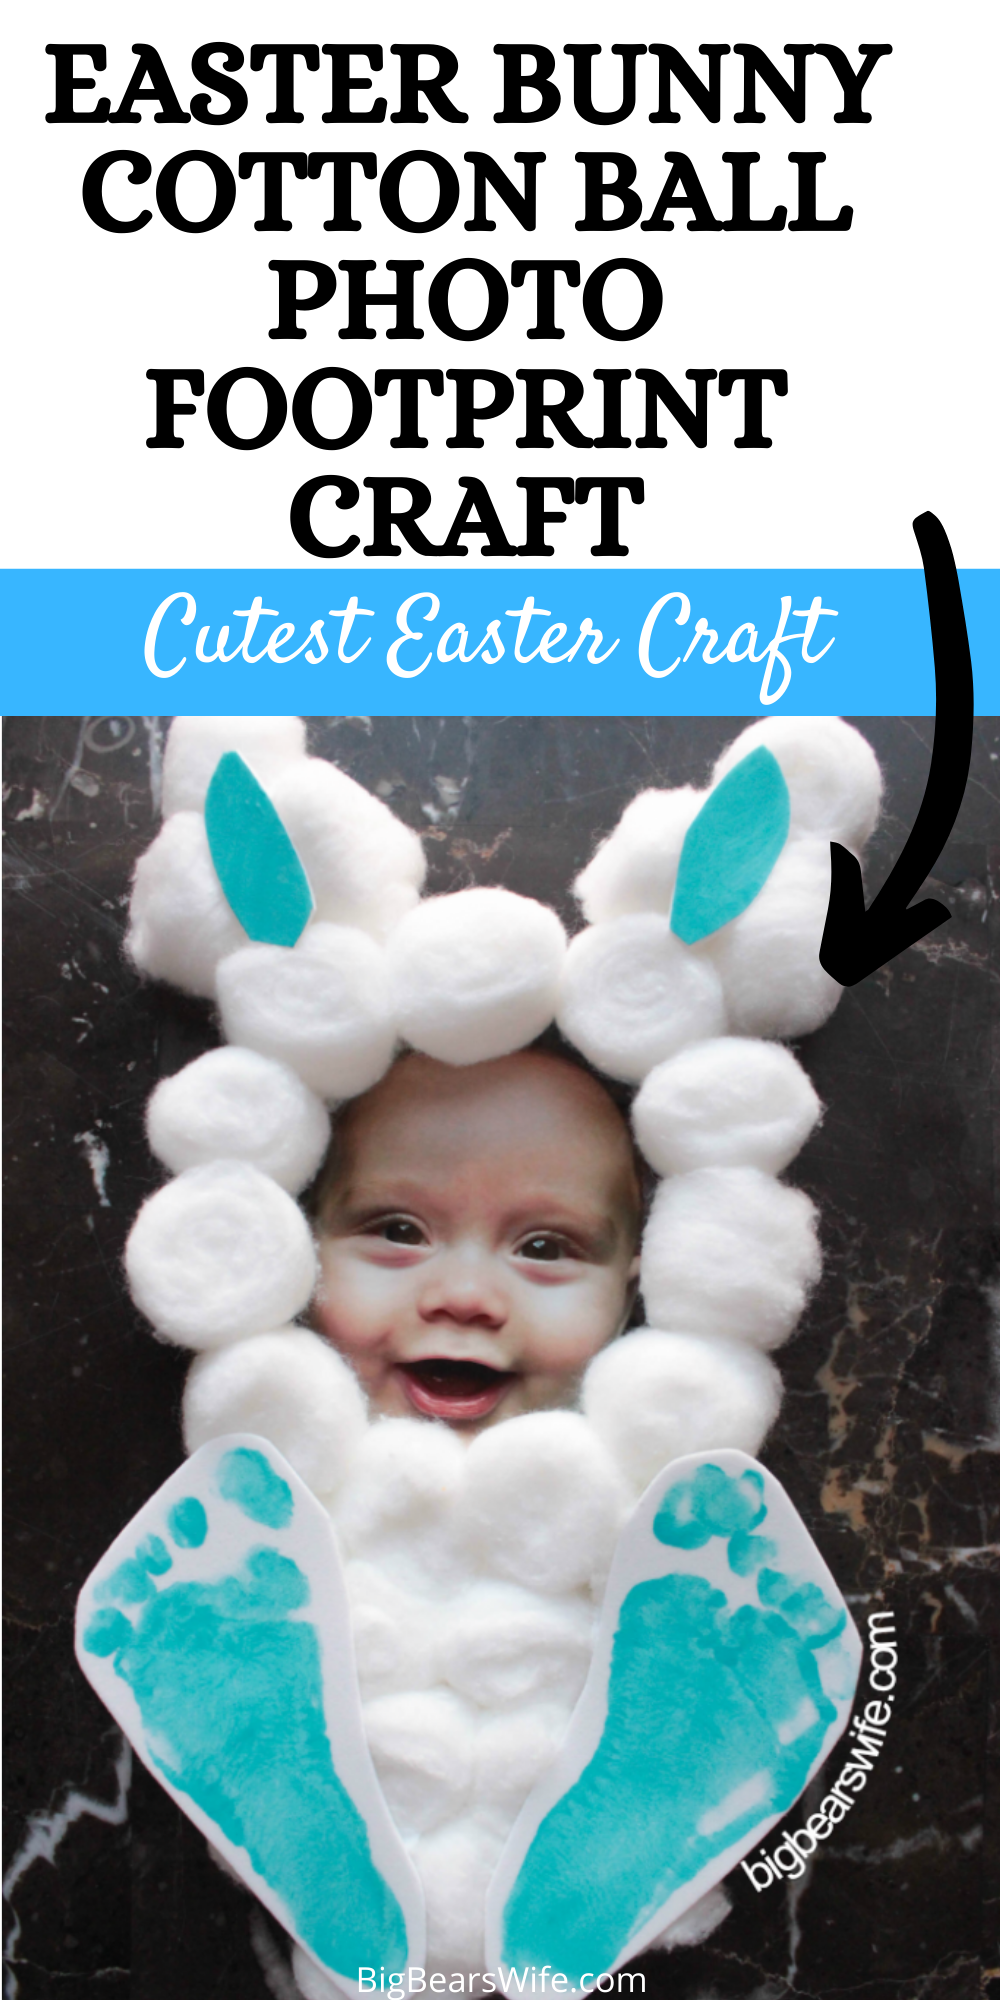 This adorable Easter Bunny Cotton Ball Photo Footprint Craft turns your little one into the cutest Easter bunny on the block! It takes just a few items from the craft store, a picture and about 10 minutes to create. via @bigbearswife